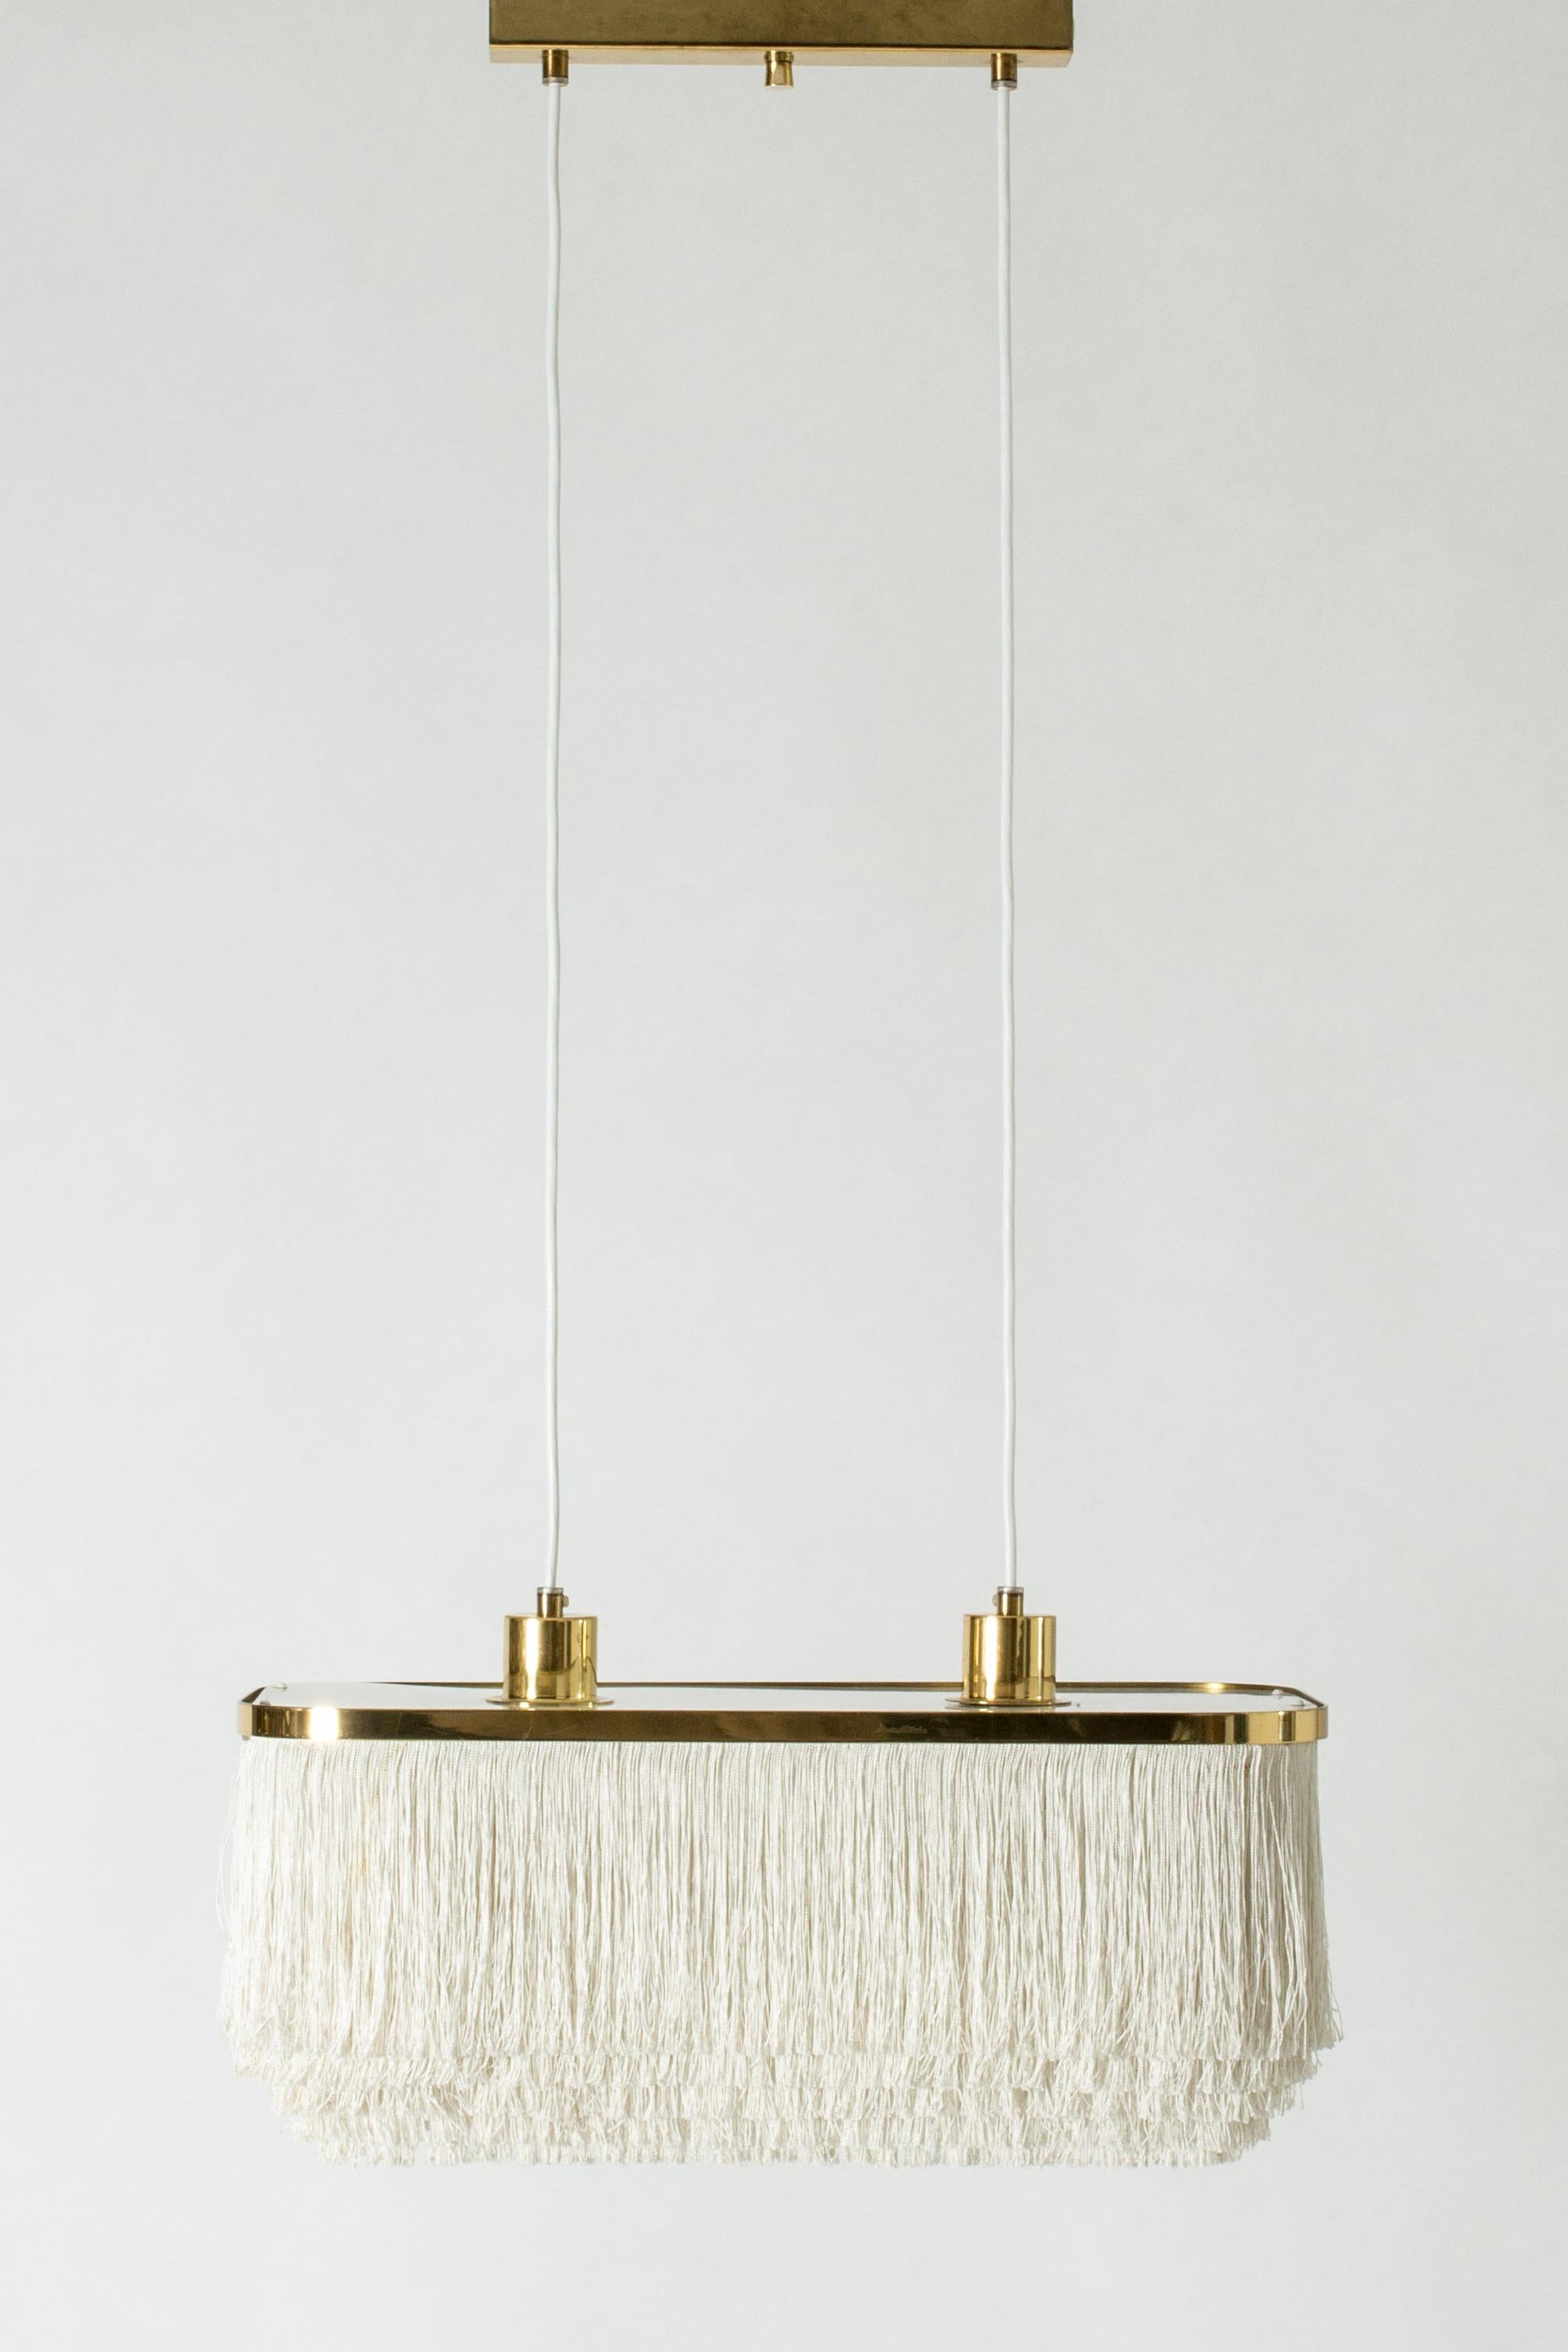 “Fringe” ceiling lamp by Hans-Agne Jakobsson, made with a rectangular brass and plexi glass frame. Drapes of textile chords are suspended in layers from shade. Perfect boudoir lighting.